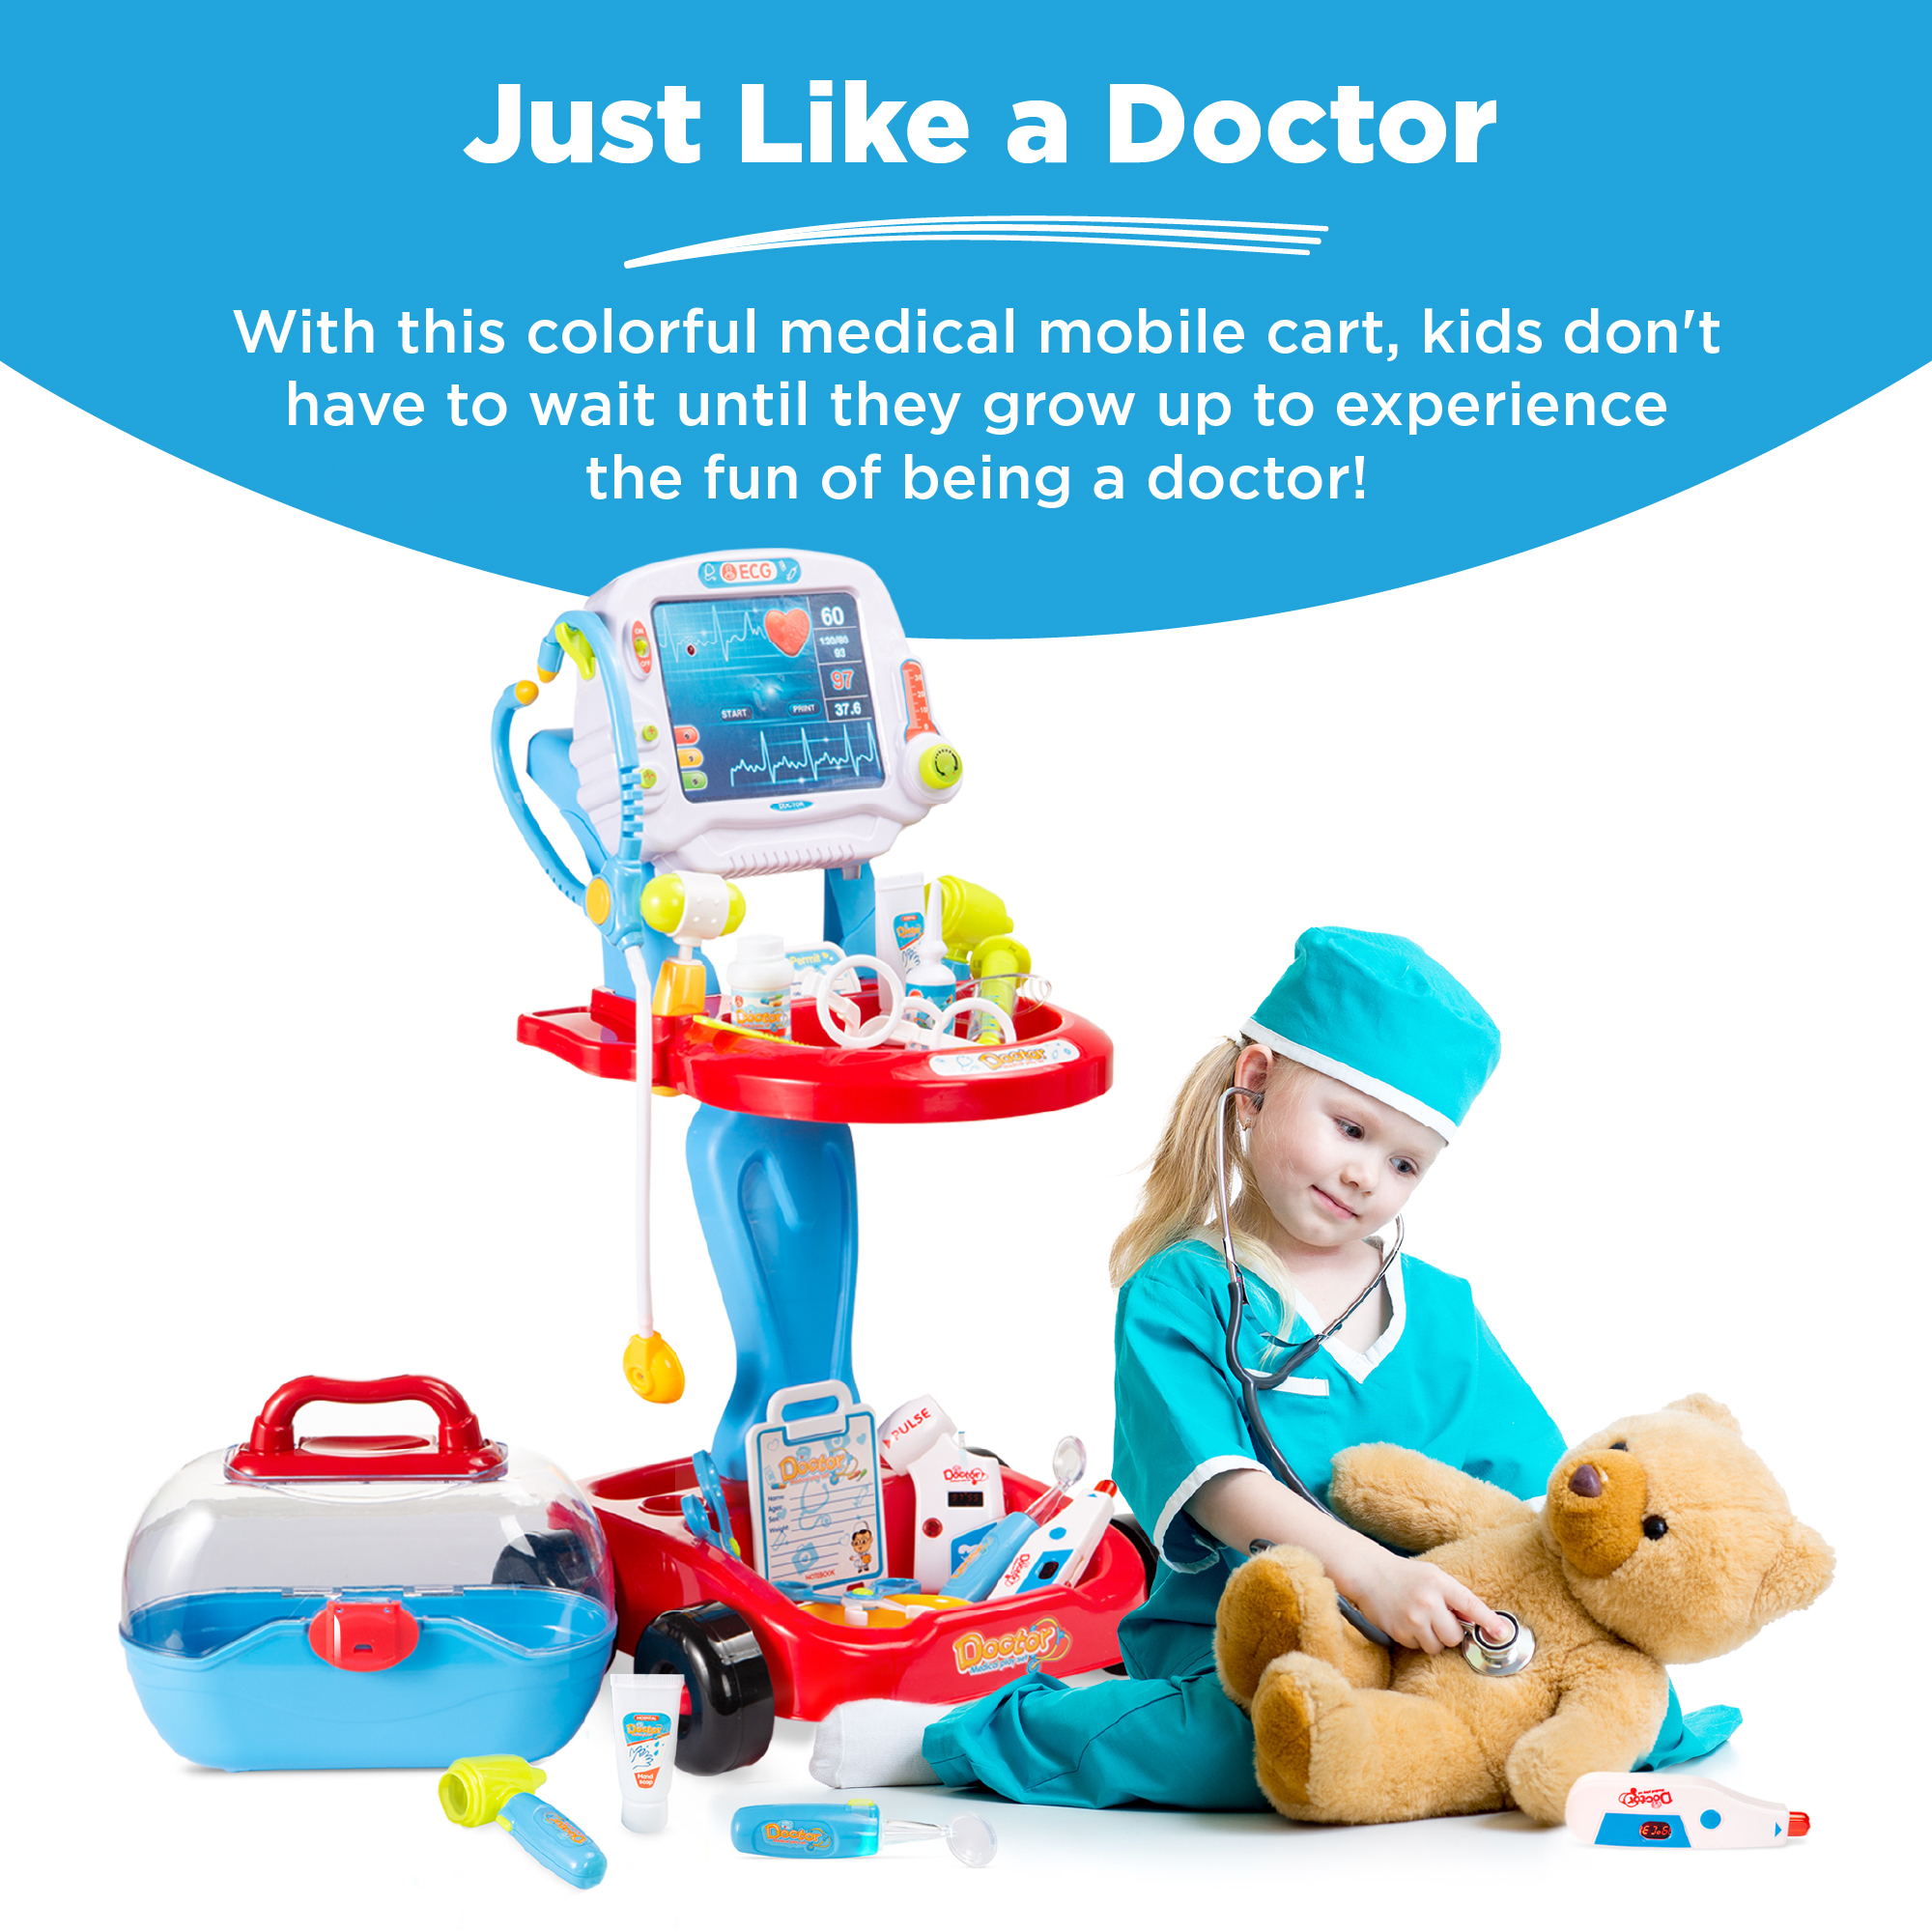 Best Choice Products Play Doctor Kit for Kids, Pretend Medical Station Set with Carrying Case, Mobile Cart - Blue - image 2 of 7